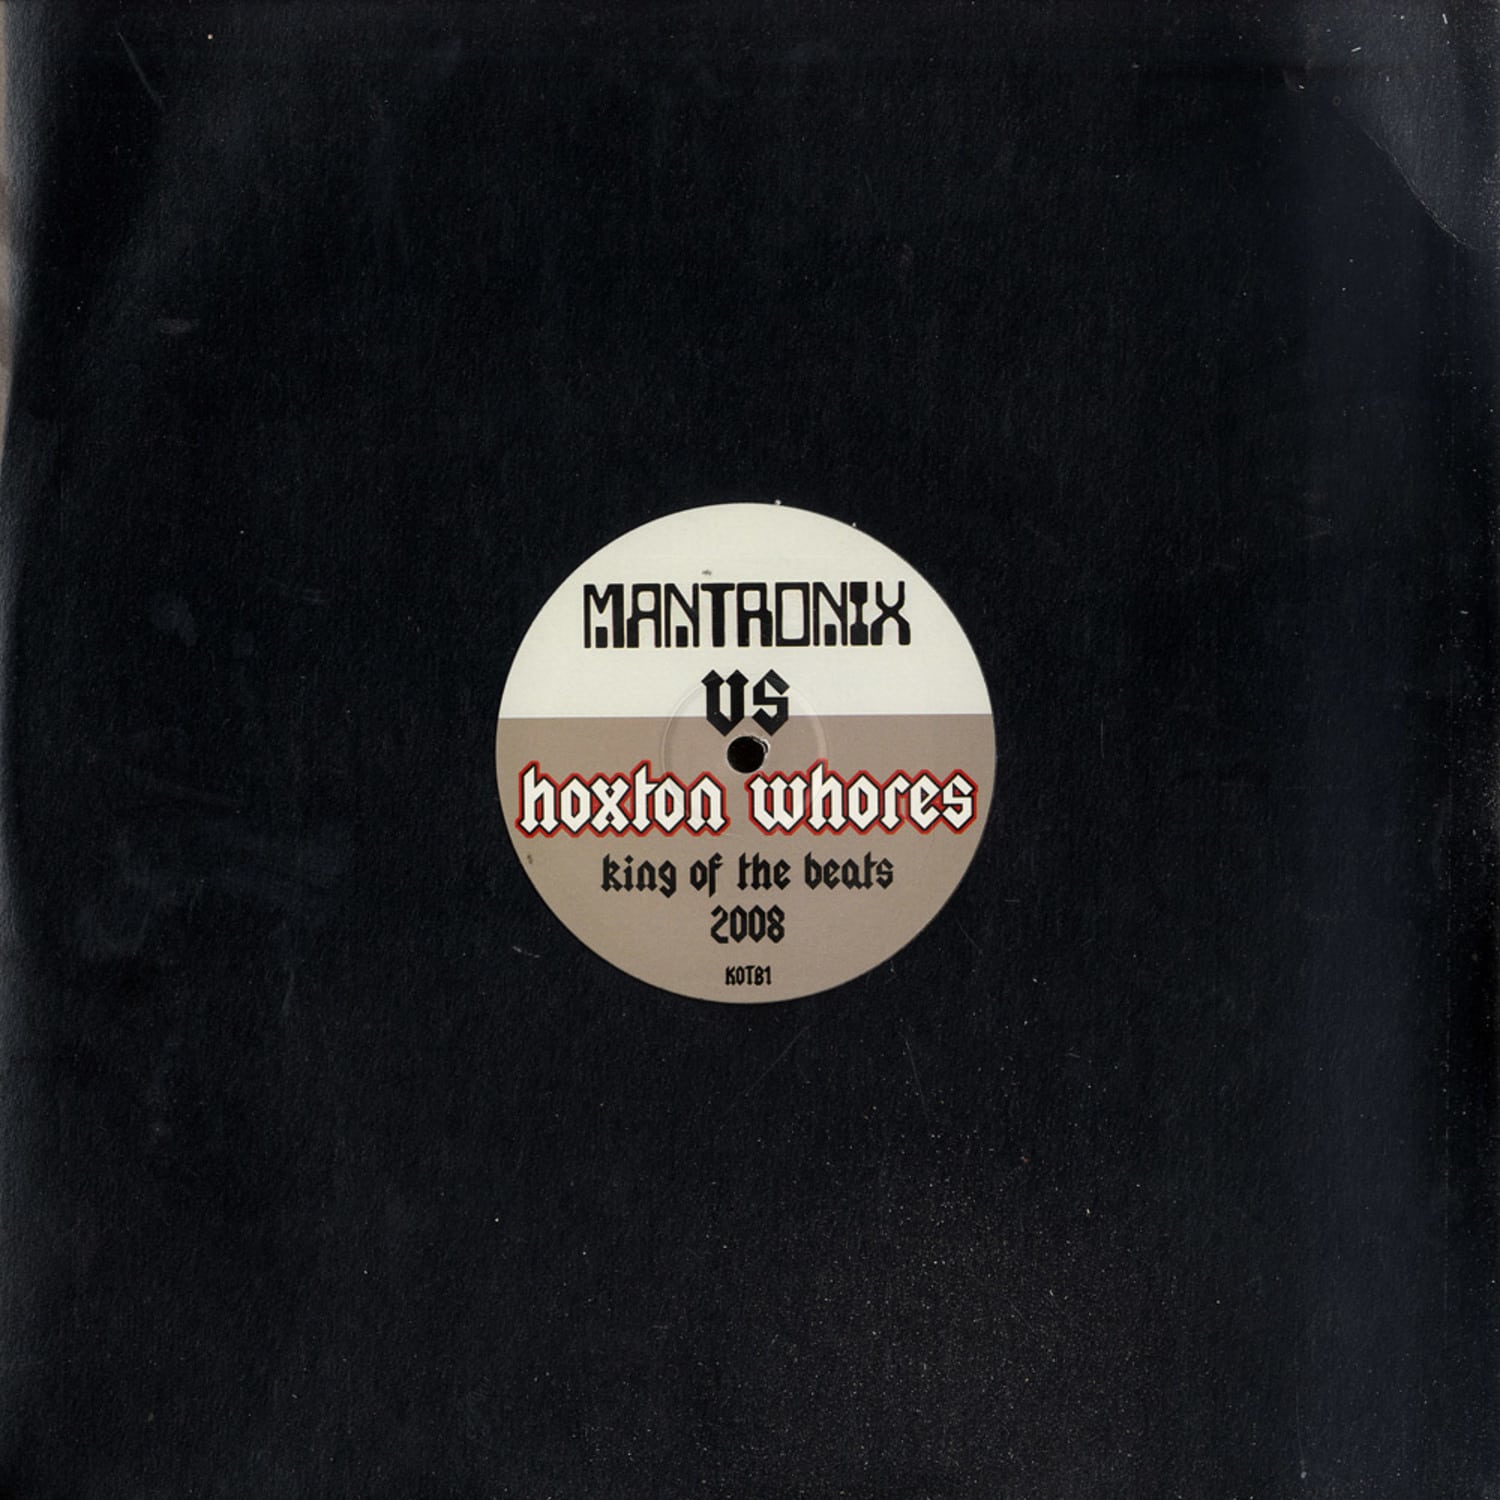 Hoxtons vs Mantroni - KING OF THE BEATS 2008